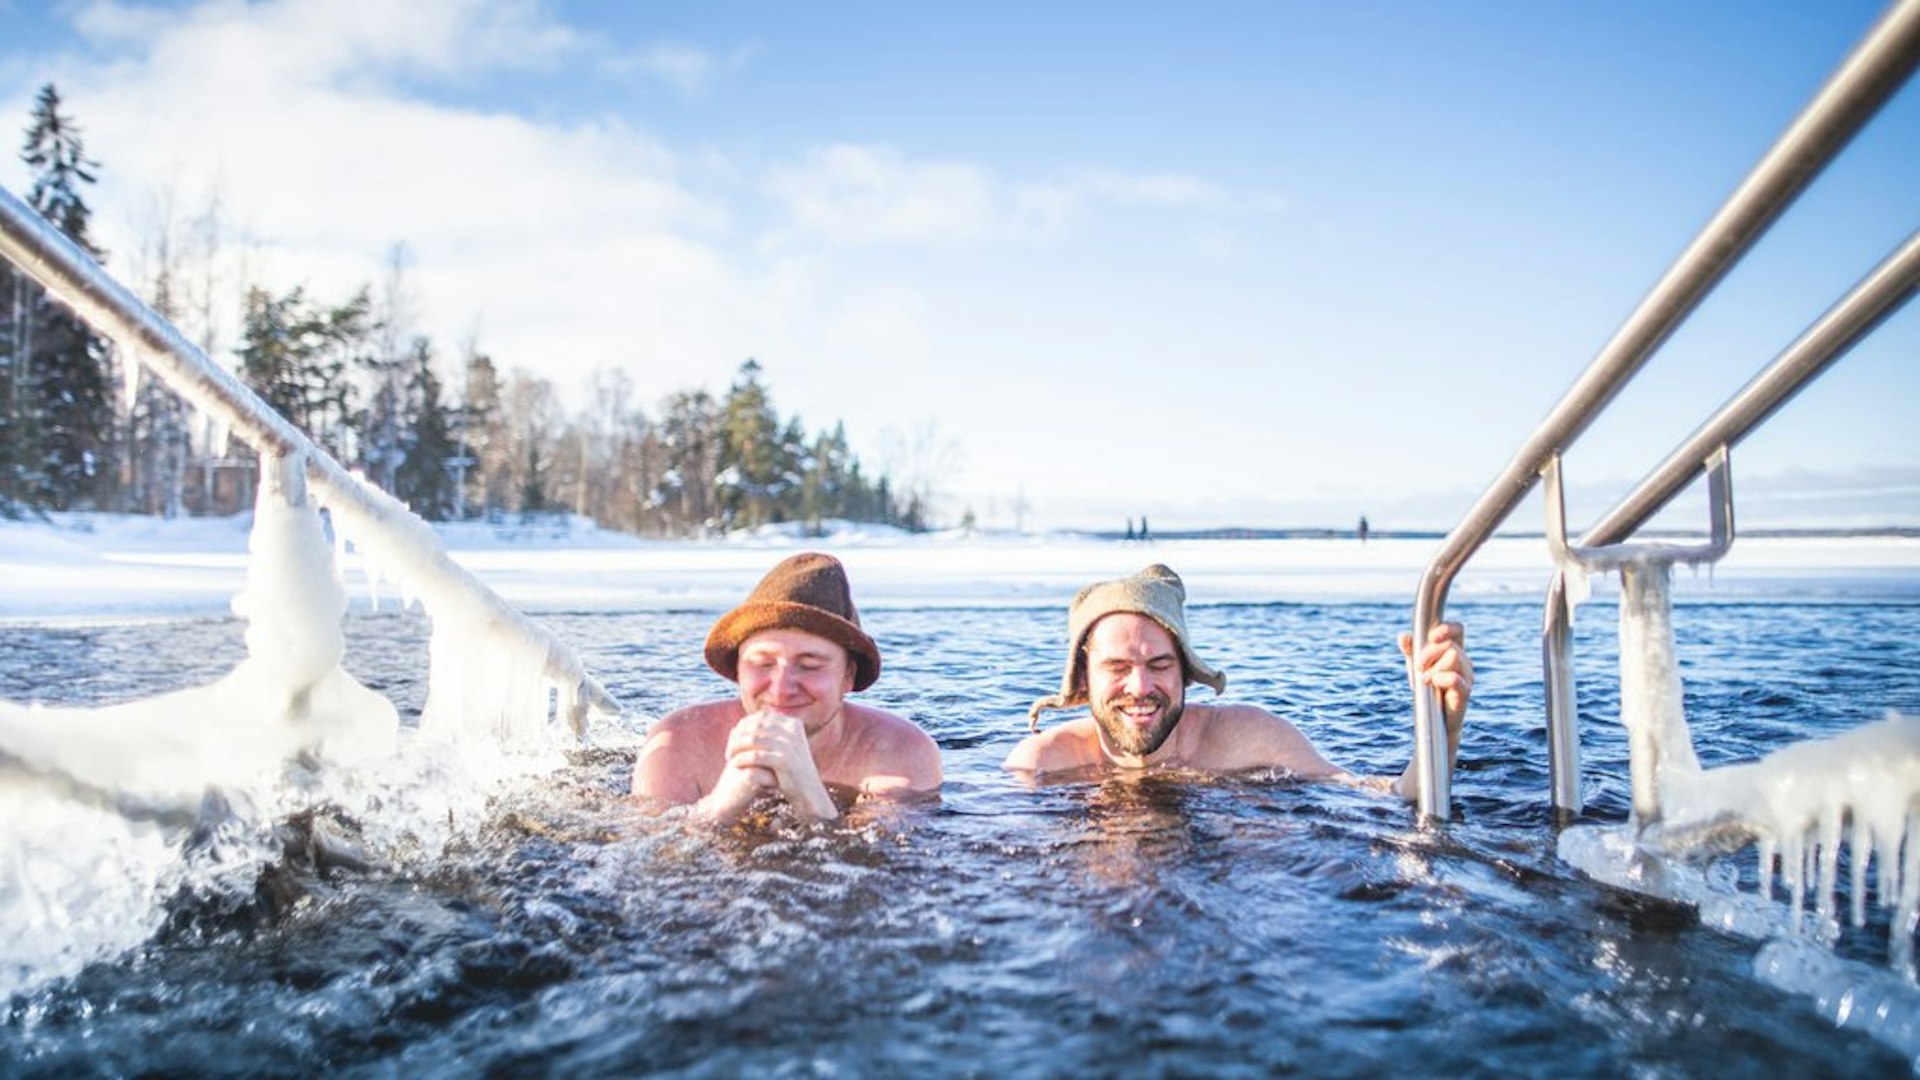 Two men wearing hats are grinning as they submerge their bodies in a frozen pool after having warmed up in a sauna